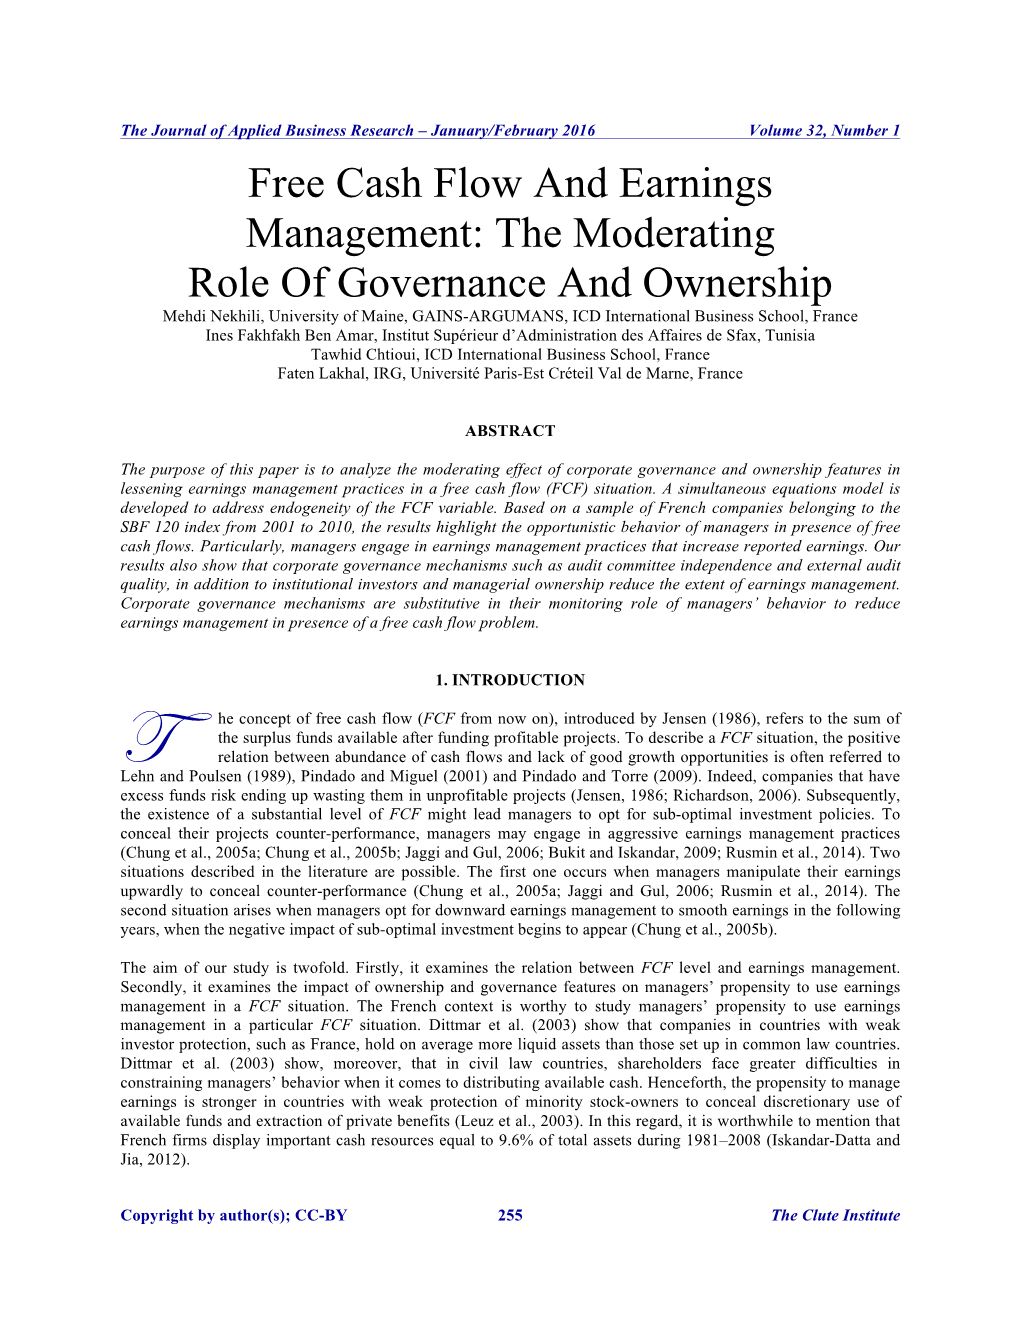 Free Cash Flow and Earnings Management: the Moderating Role